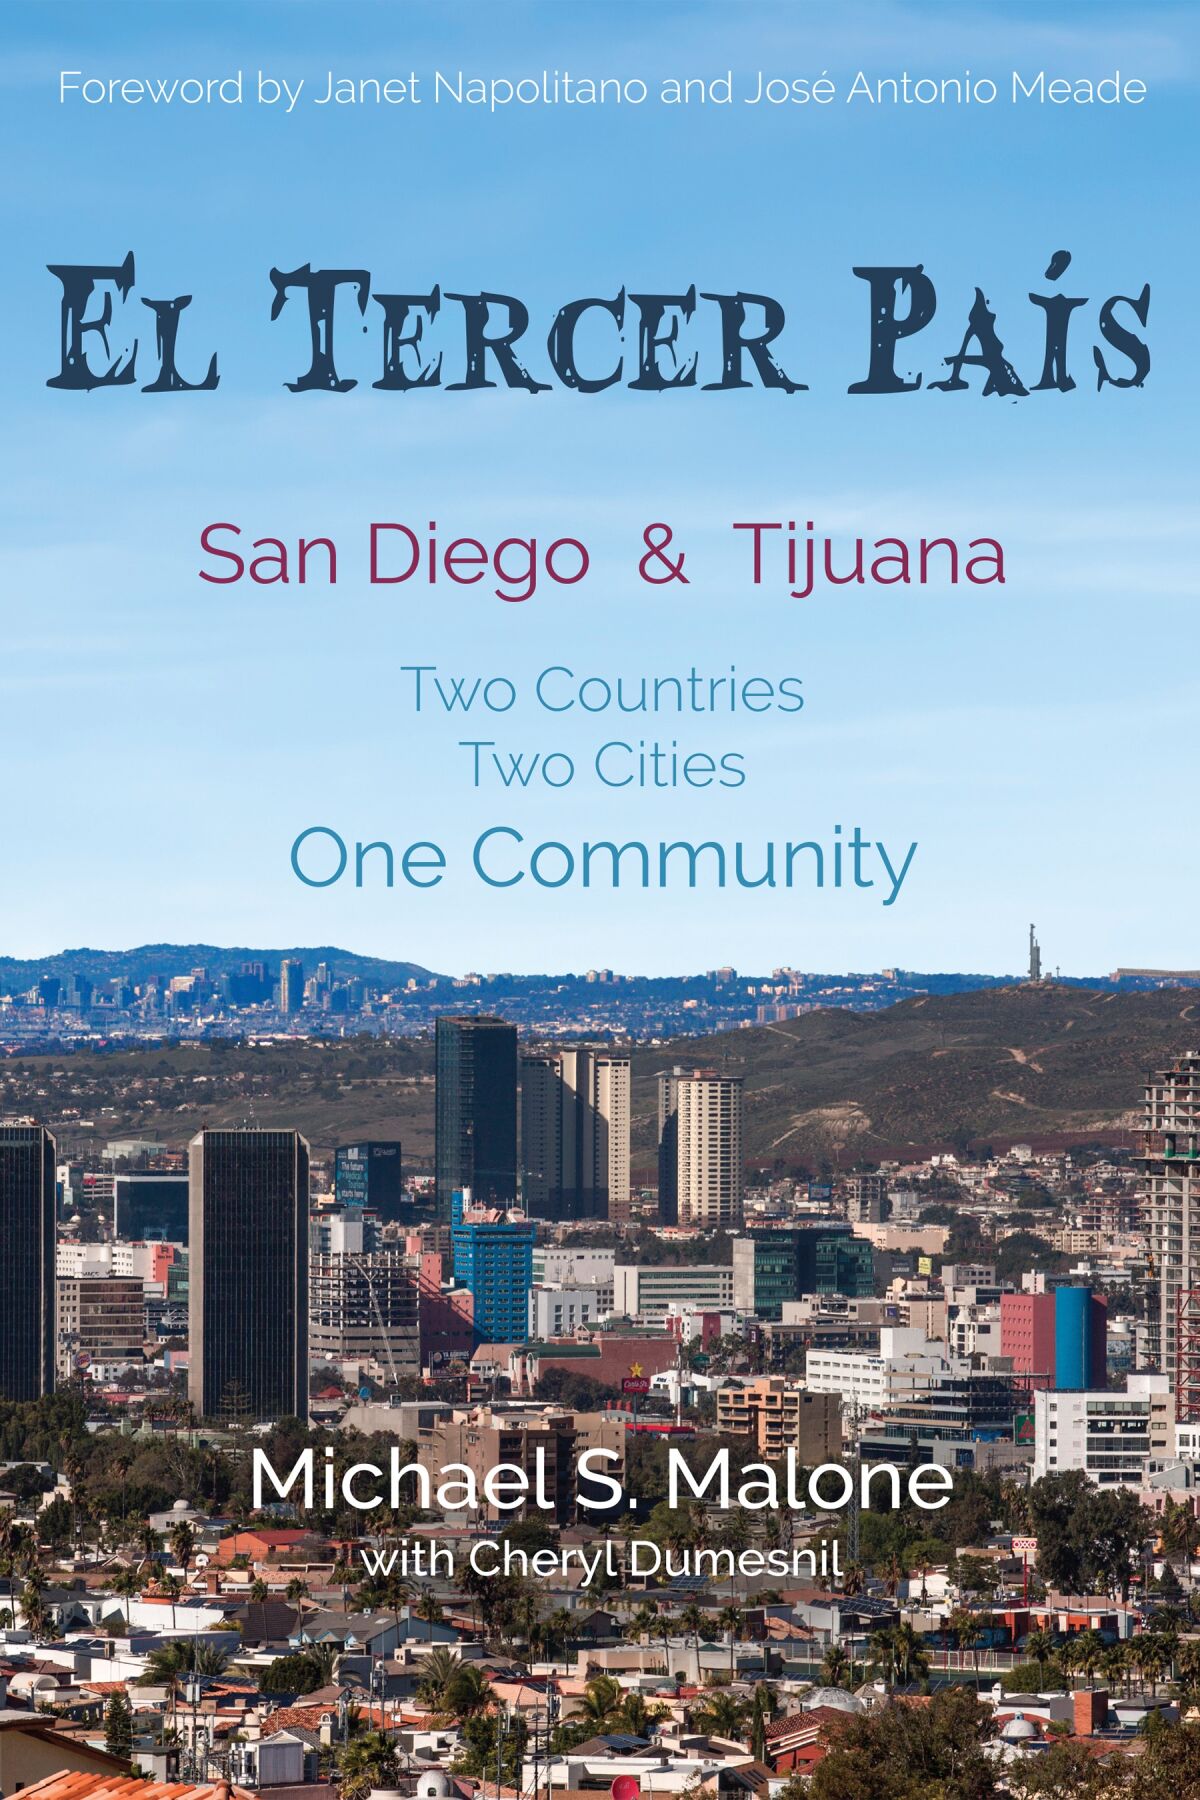 "El Tercer Pais San Diego & Tijuana: Two Countries, Two Cities, One Community" by Michael S. Malone 